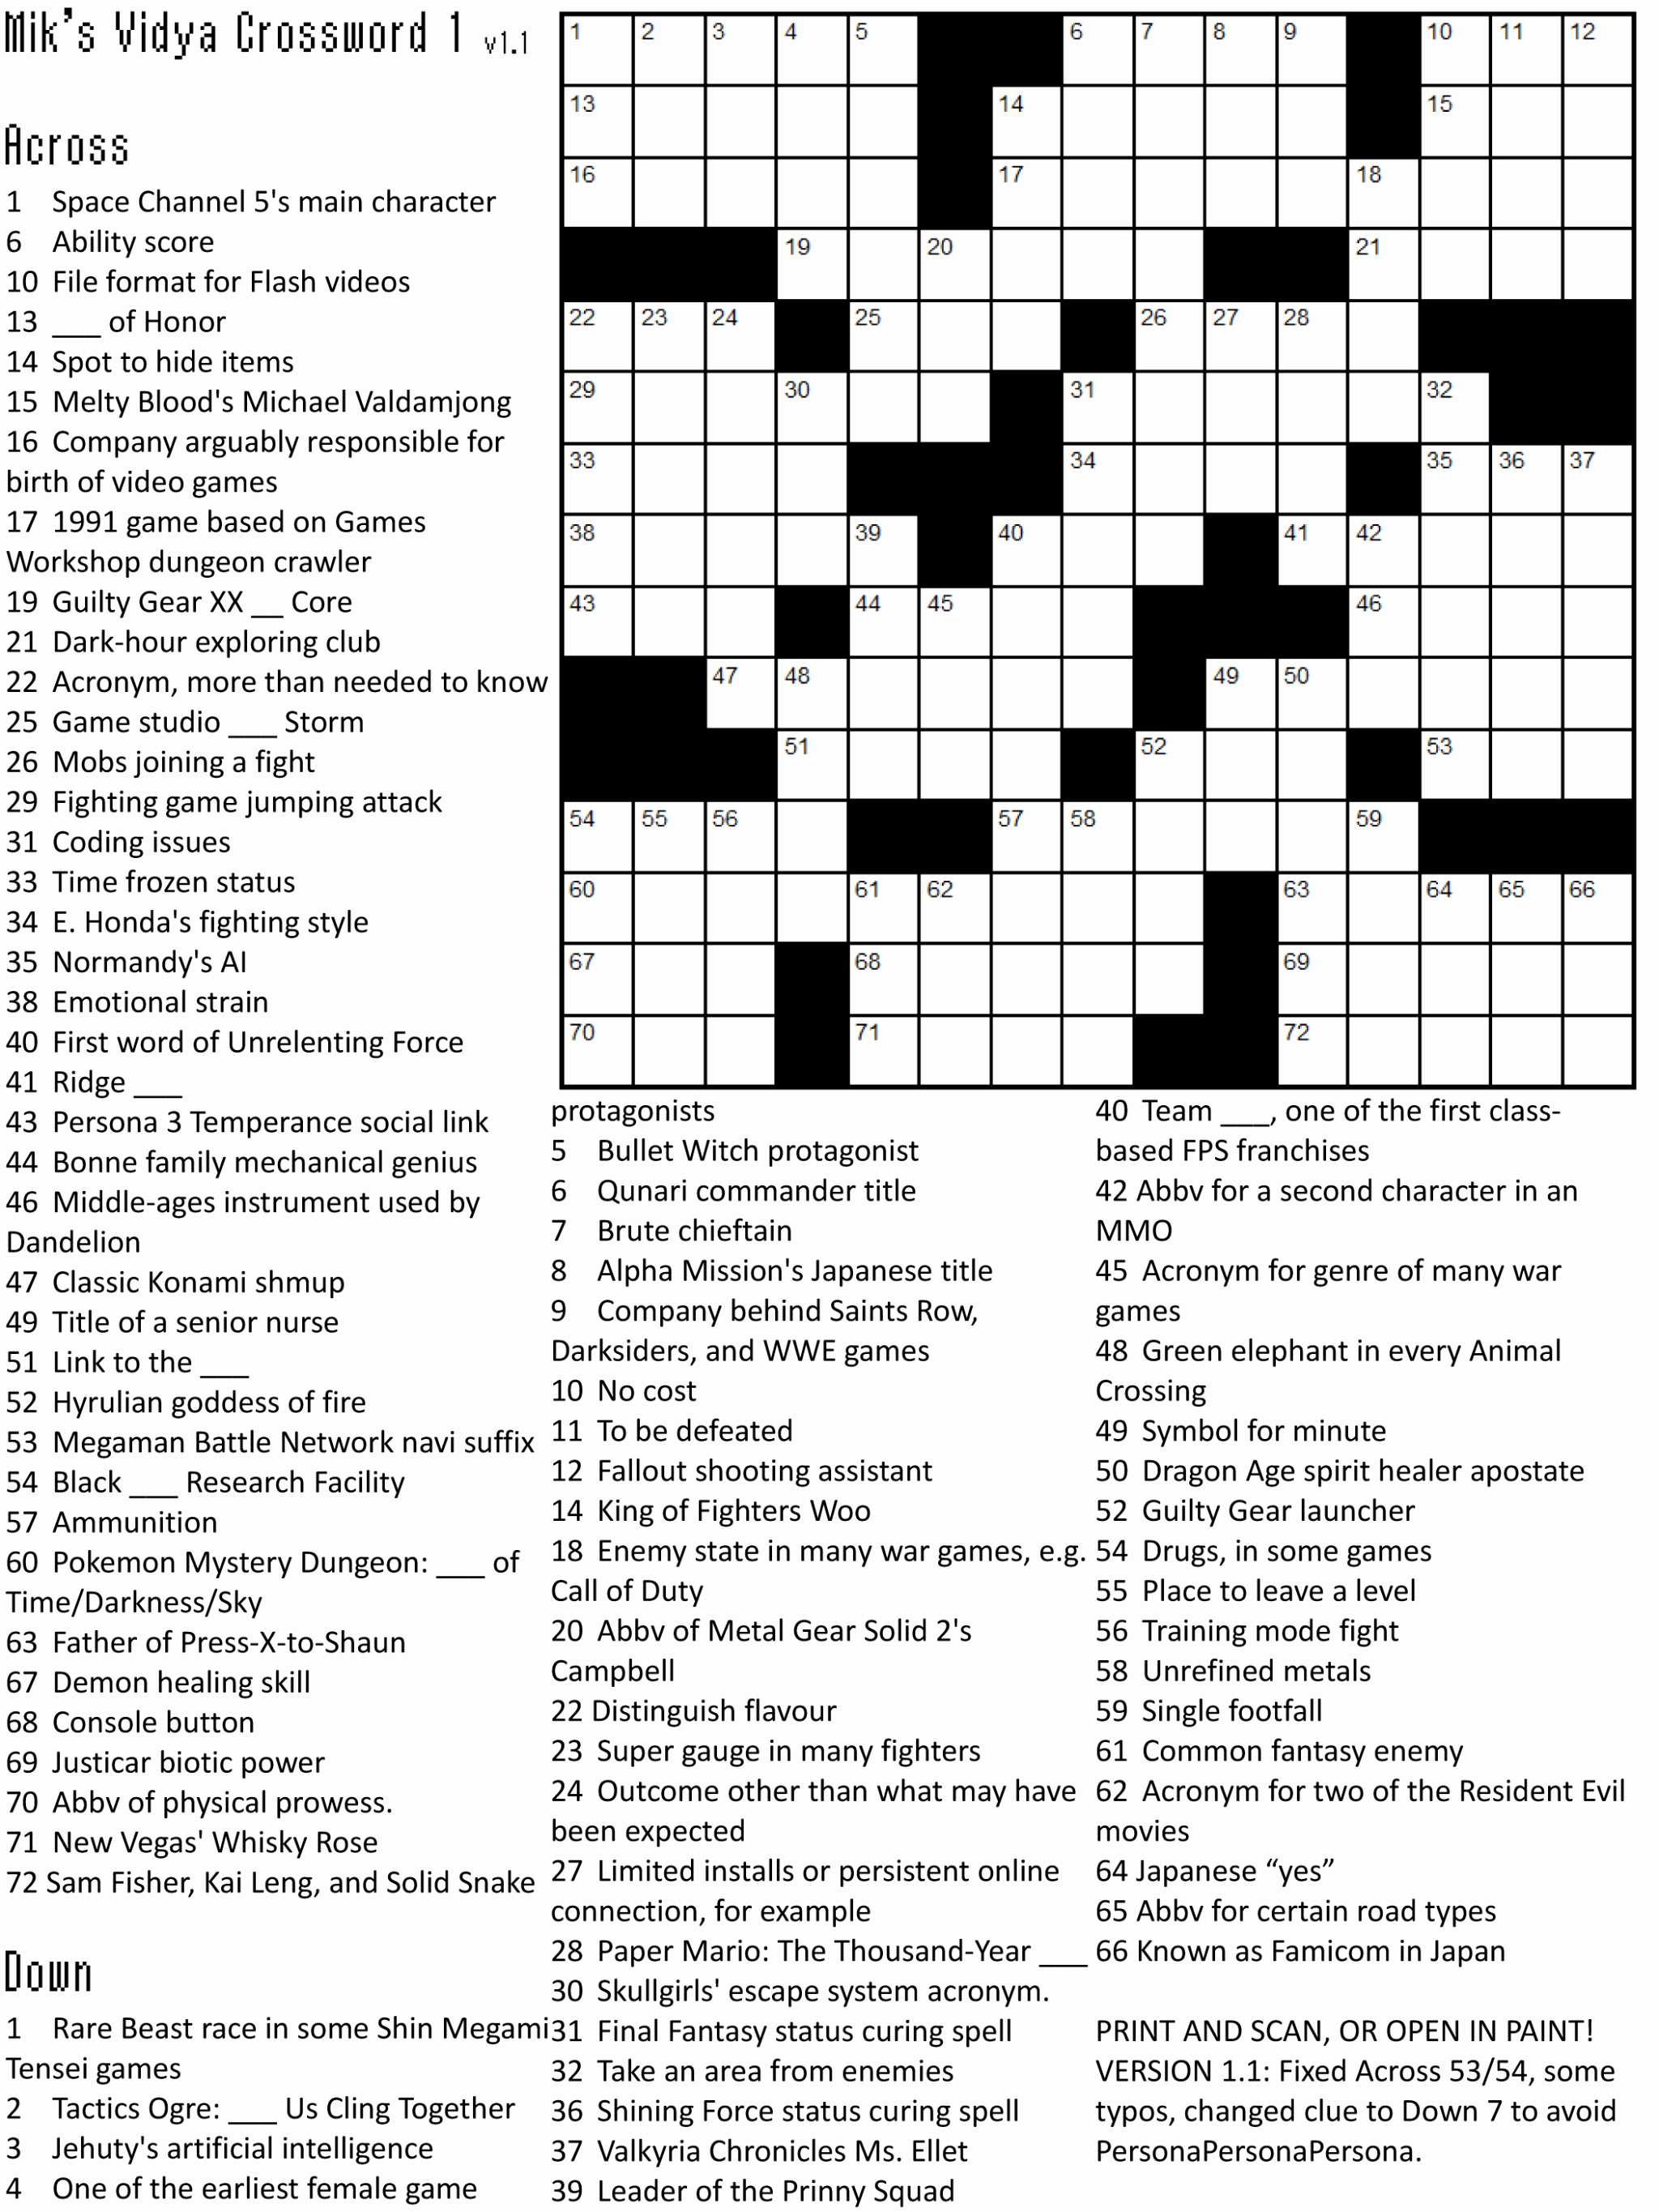 Printable Crossword Puzzles For Inmates